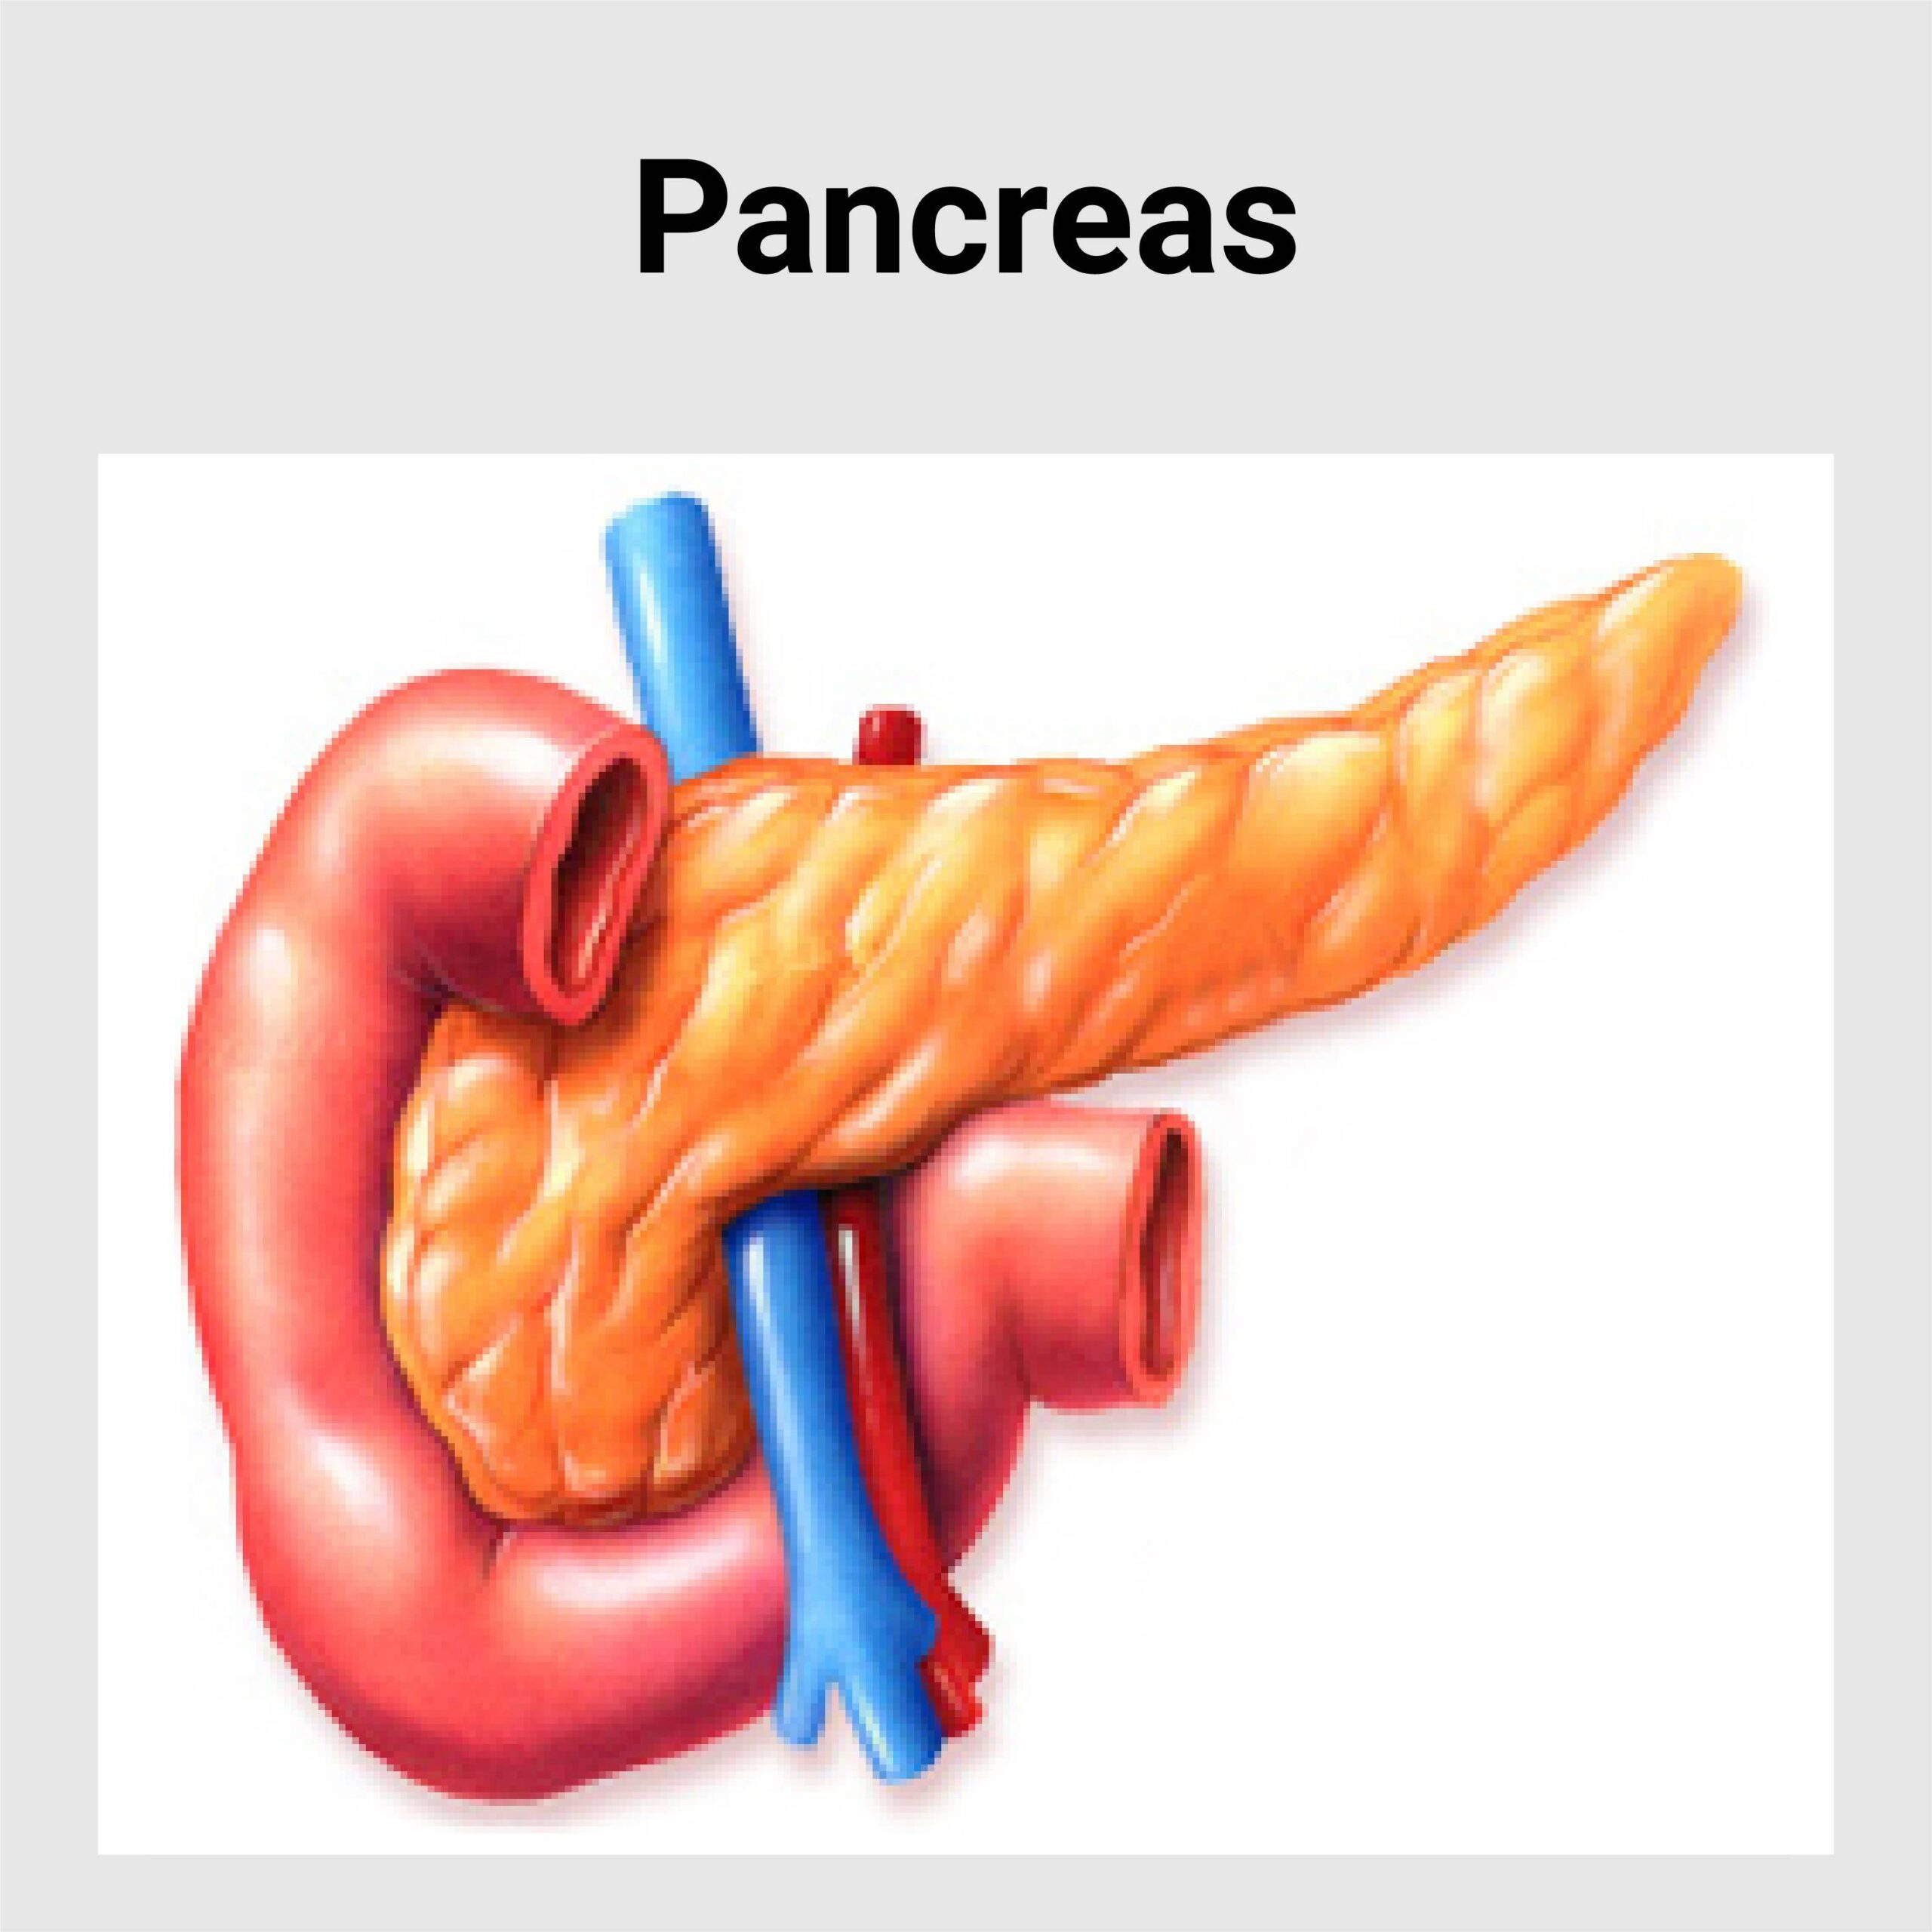 what doctor specializes in pancreas